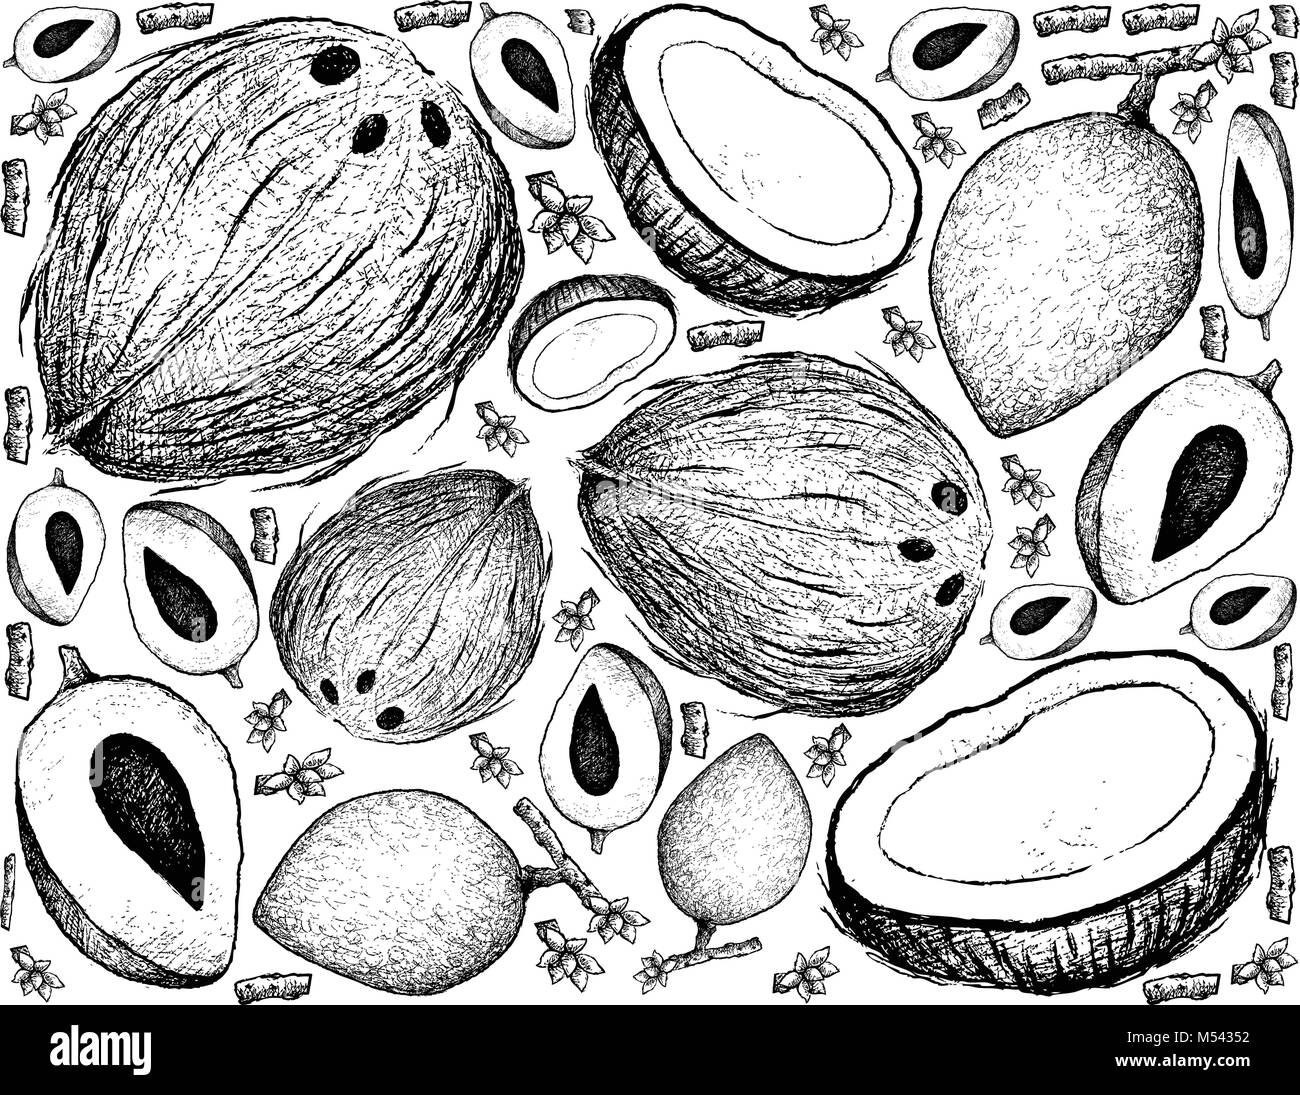 Tropical Fruits, Illustration Wallpaper Background of Hand Drawn Sketch Mamey Sapote or Pouteria Sapota Fruits. Stock Vector